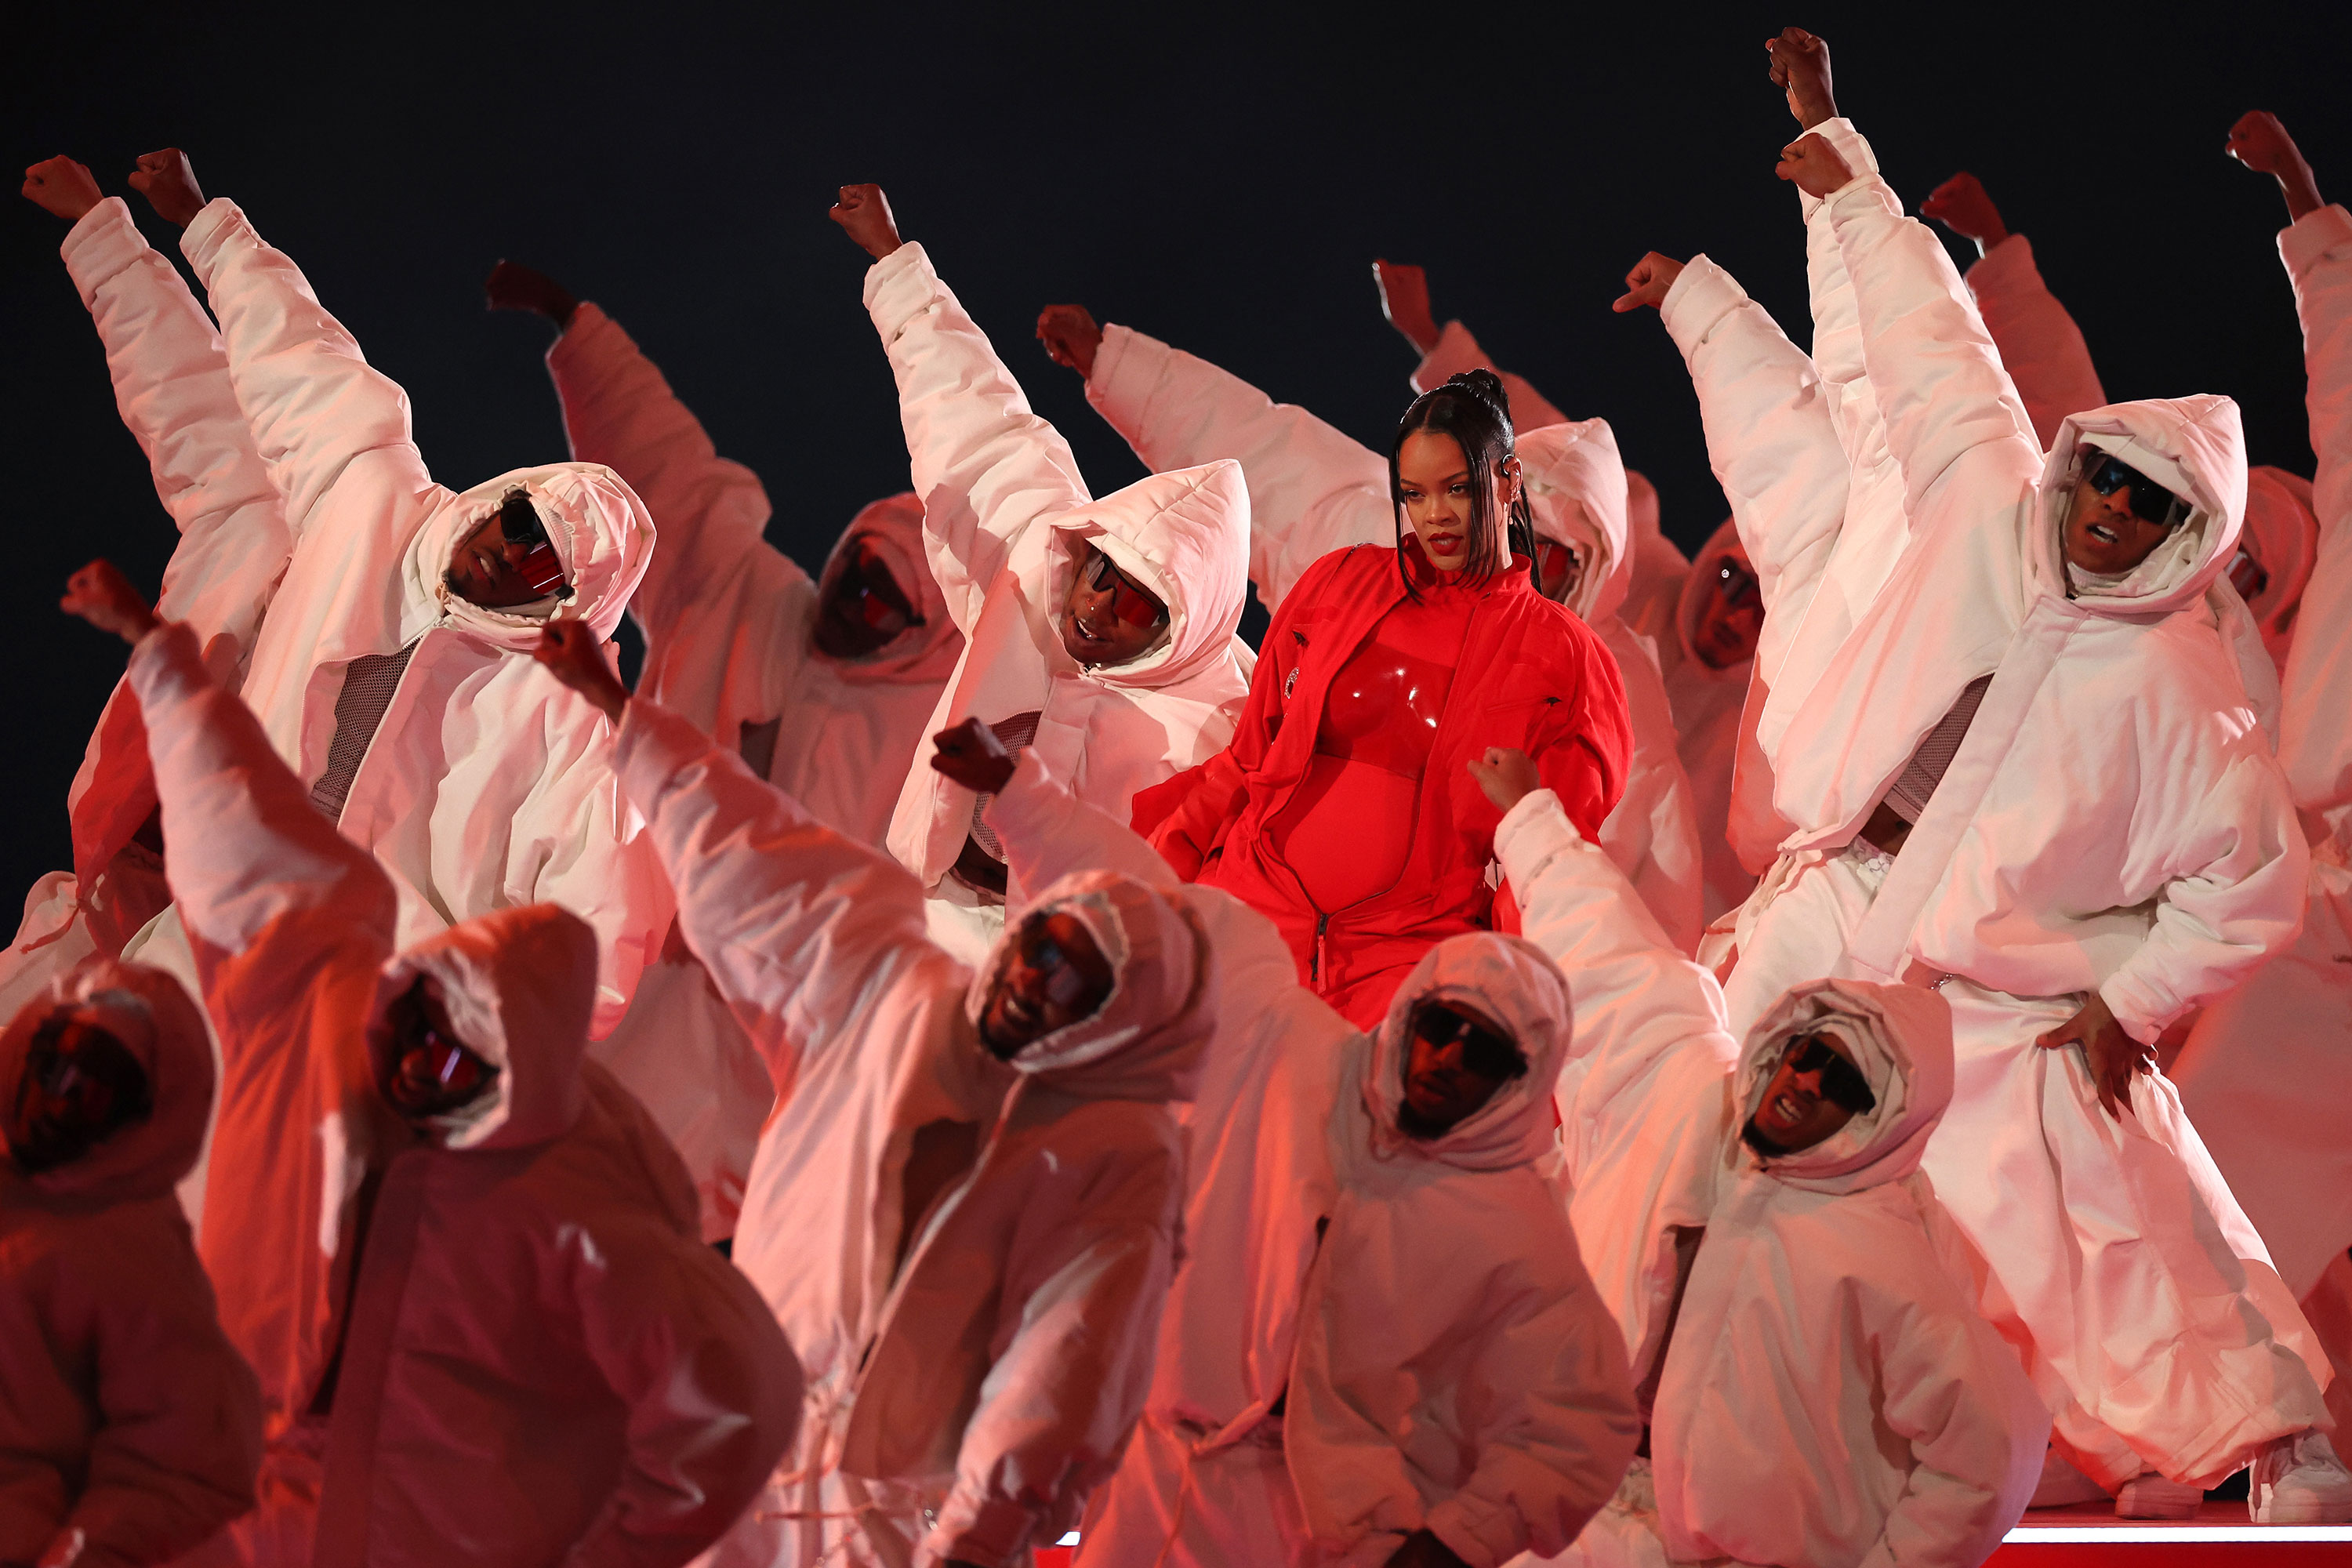 Rihanna performed a medley of her greatest hits in a dazzling solo halftime show